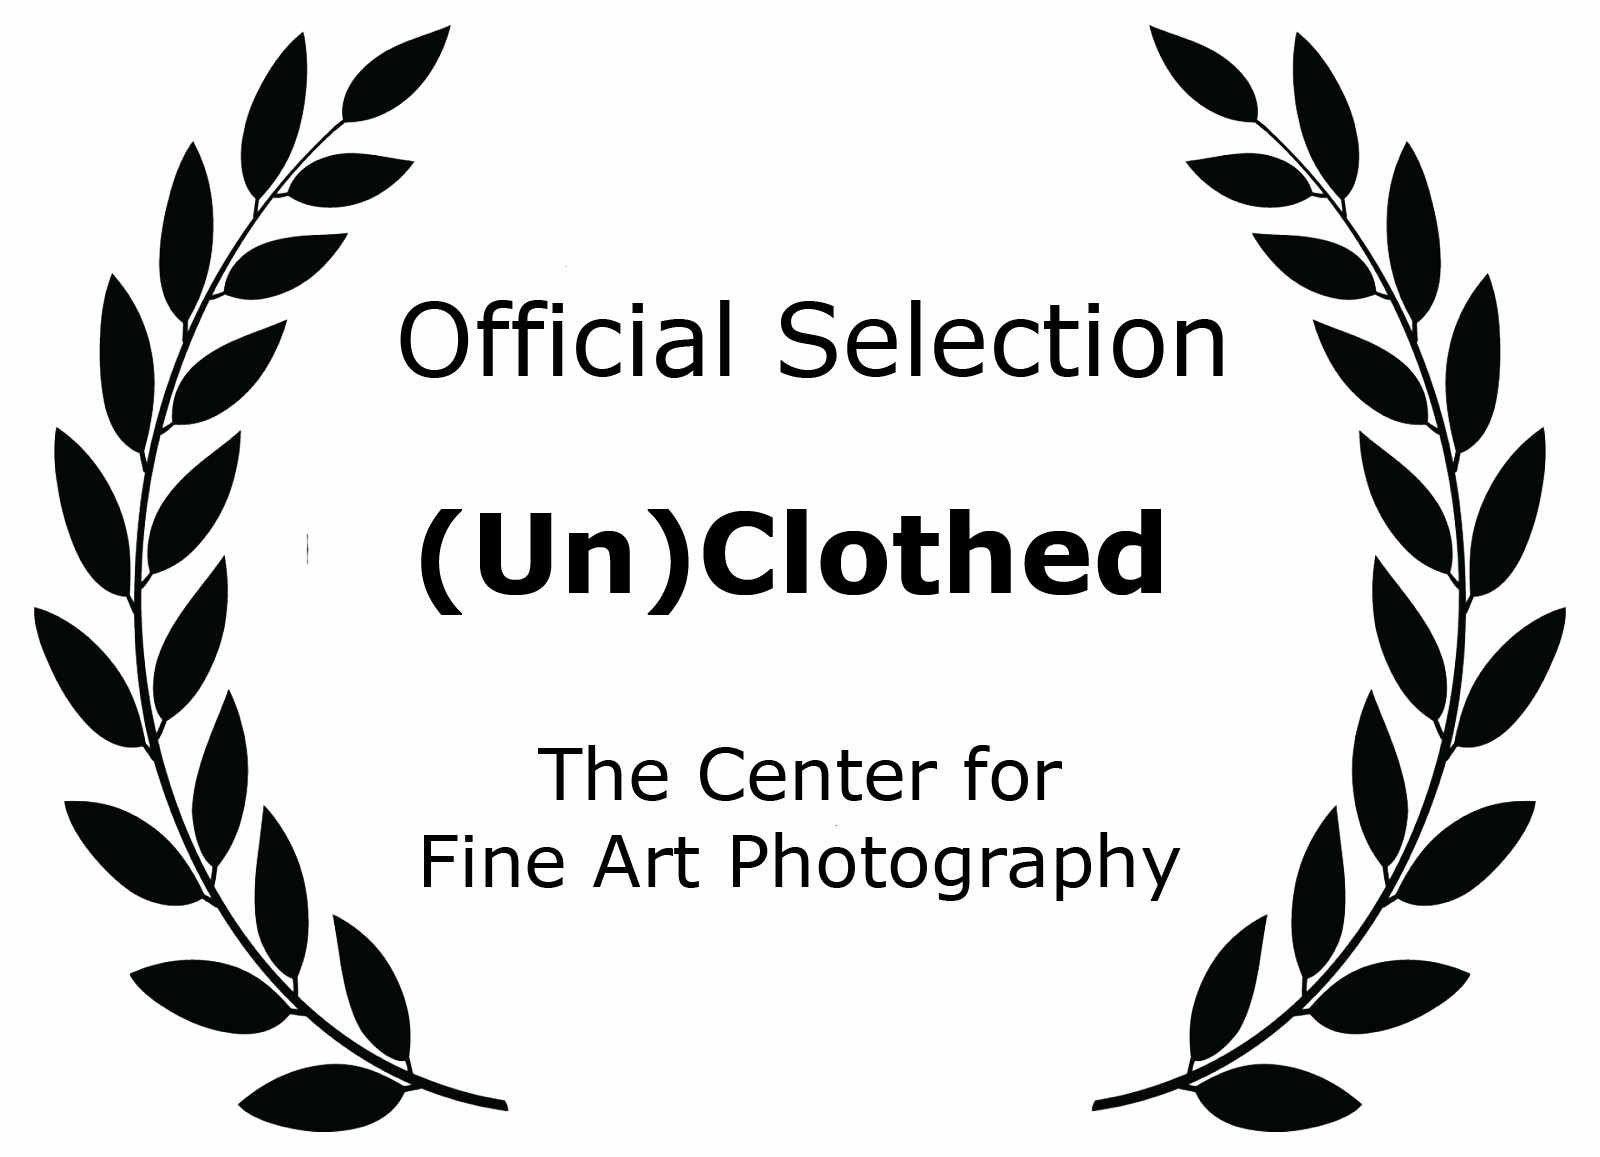 Official Selection (Un)Clothed – The Center for Fine Art Photography